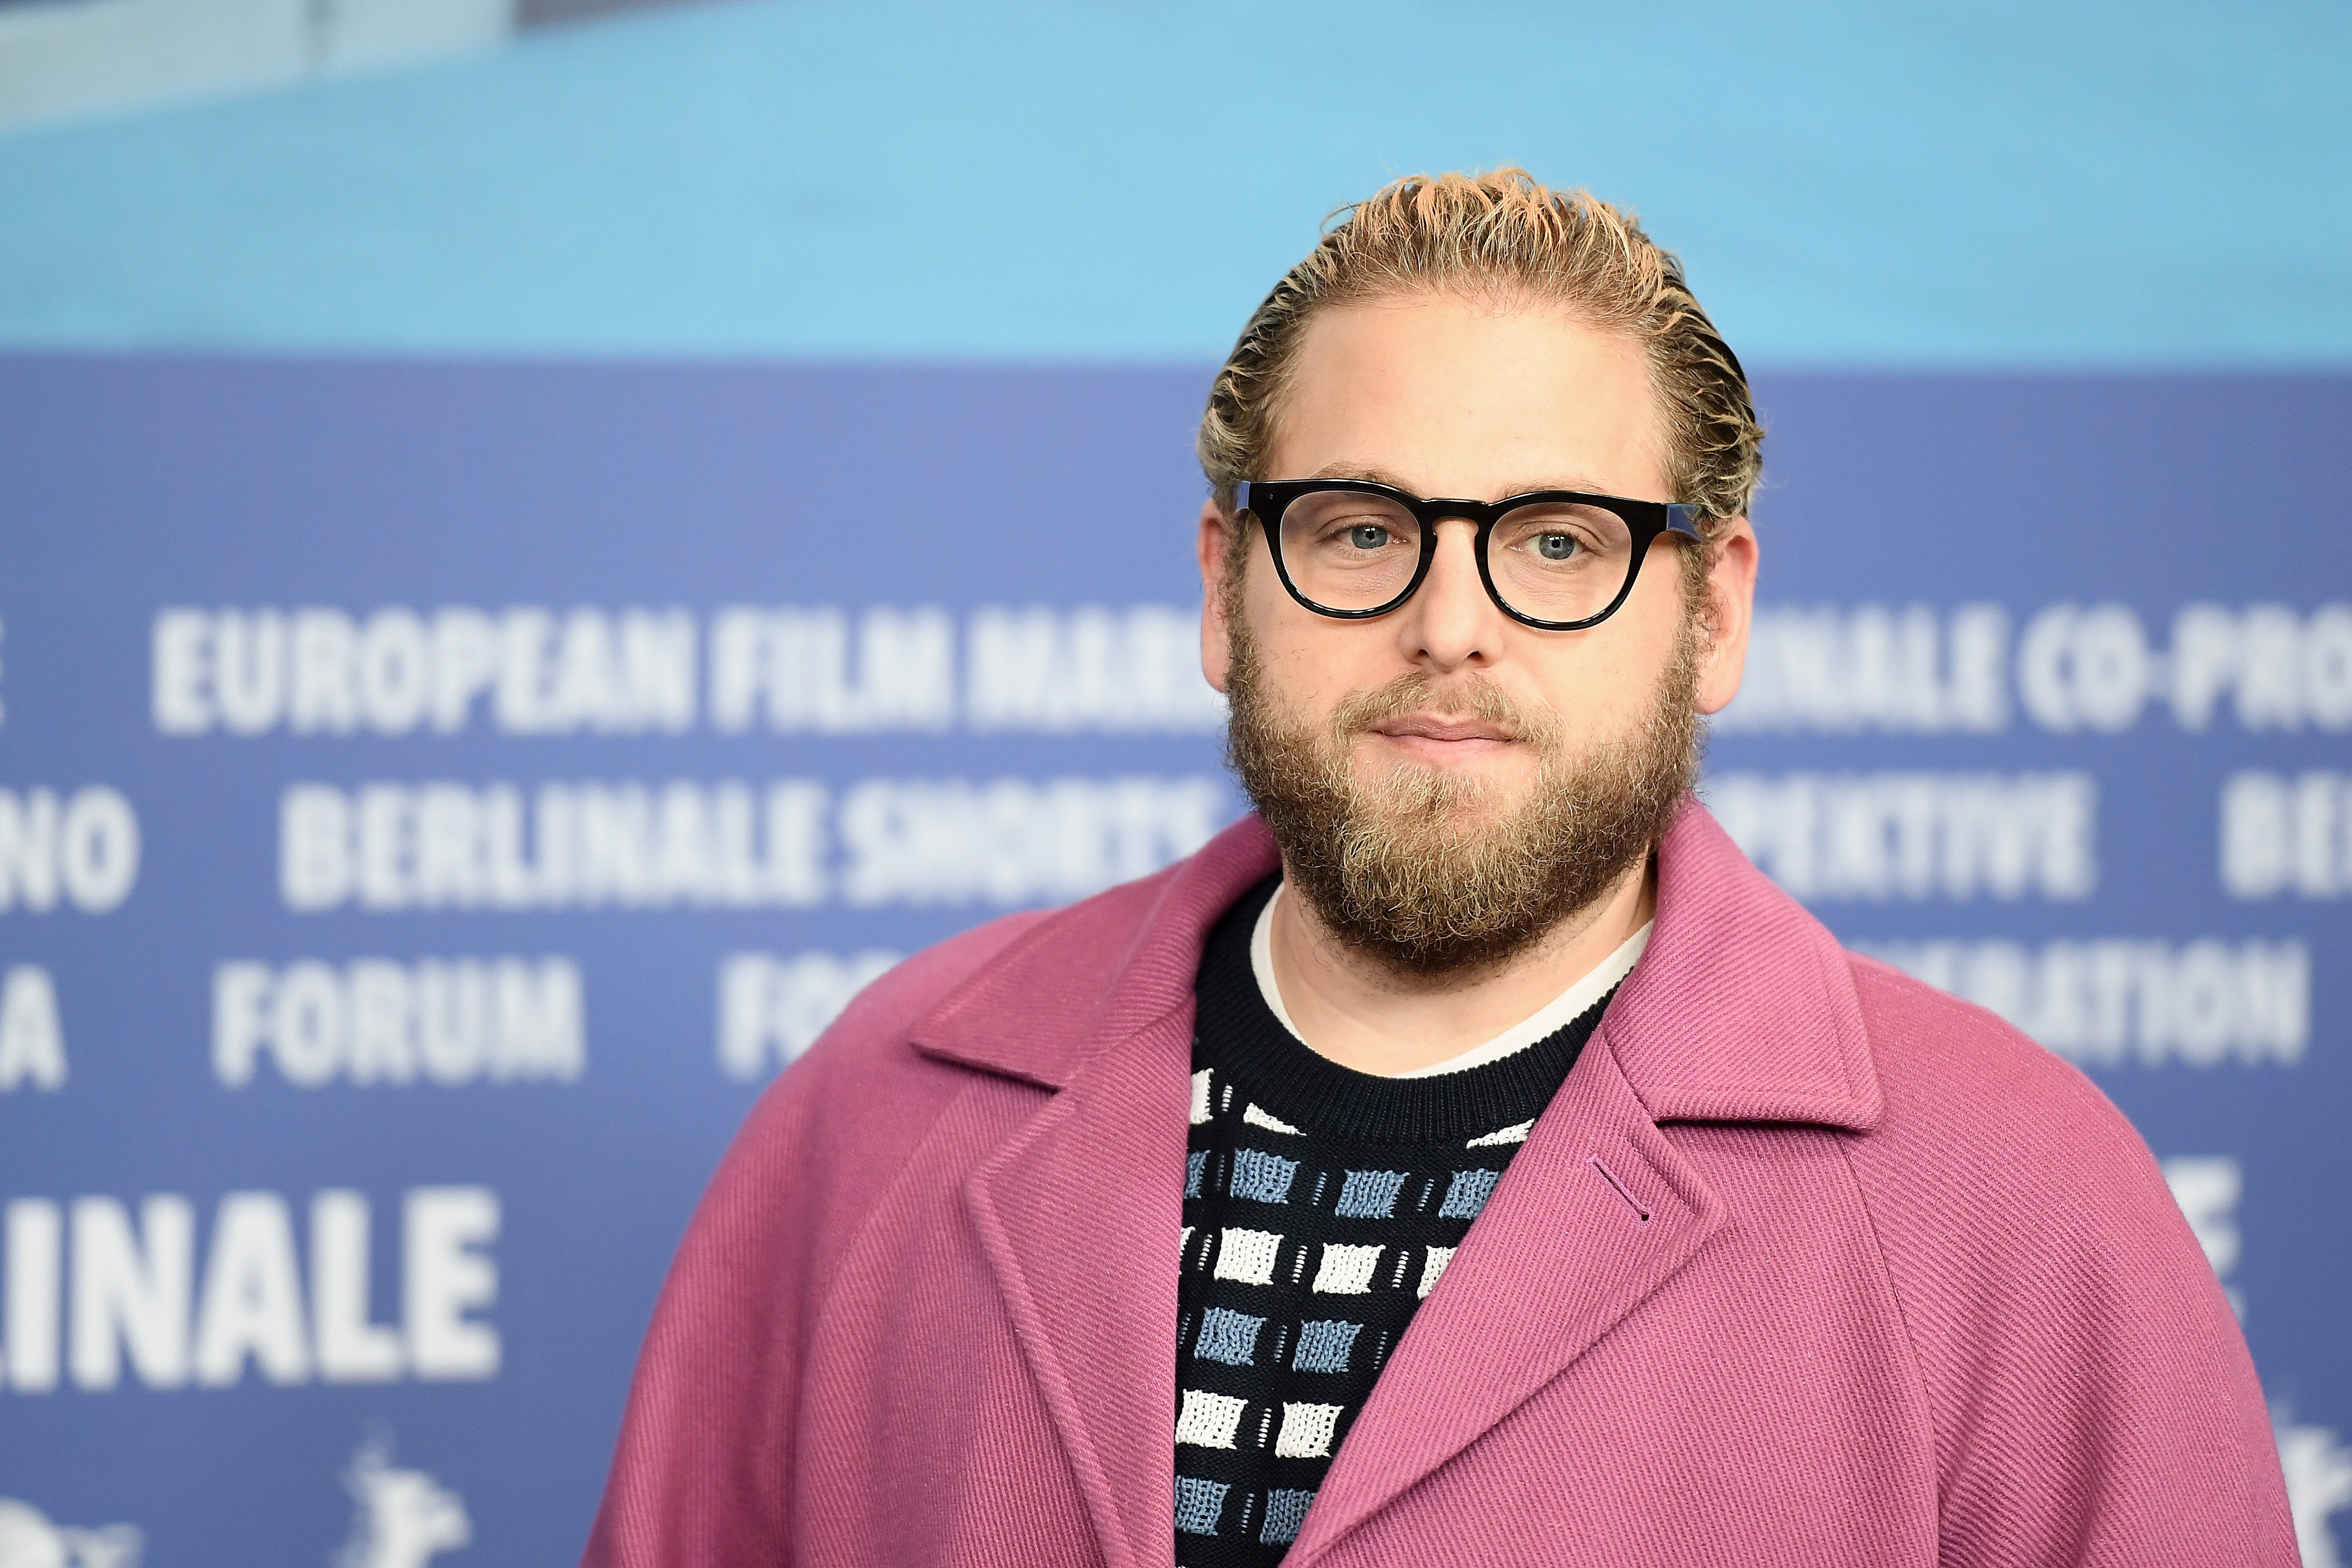 Jonah Hill claps back at beach day photos focused on his body: ‘Can’t phase me anymore’